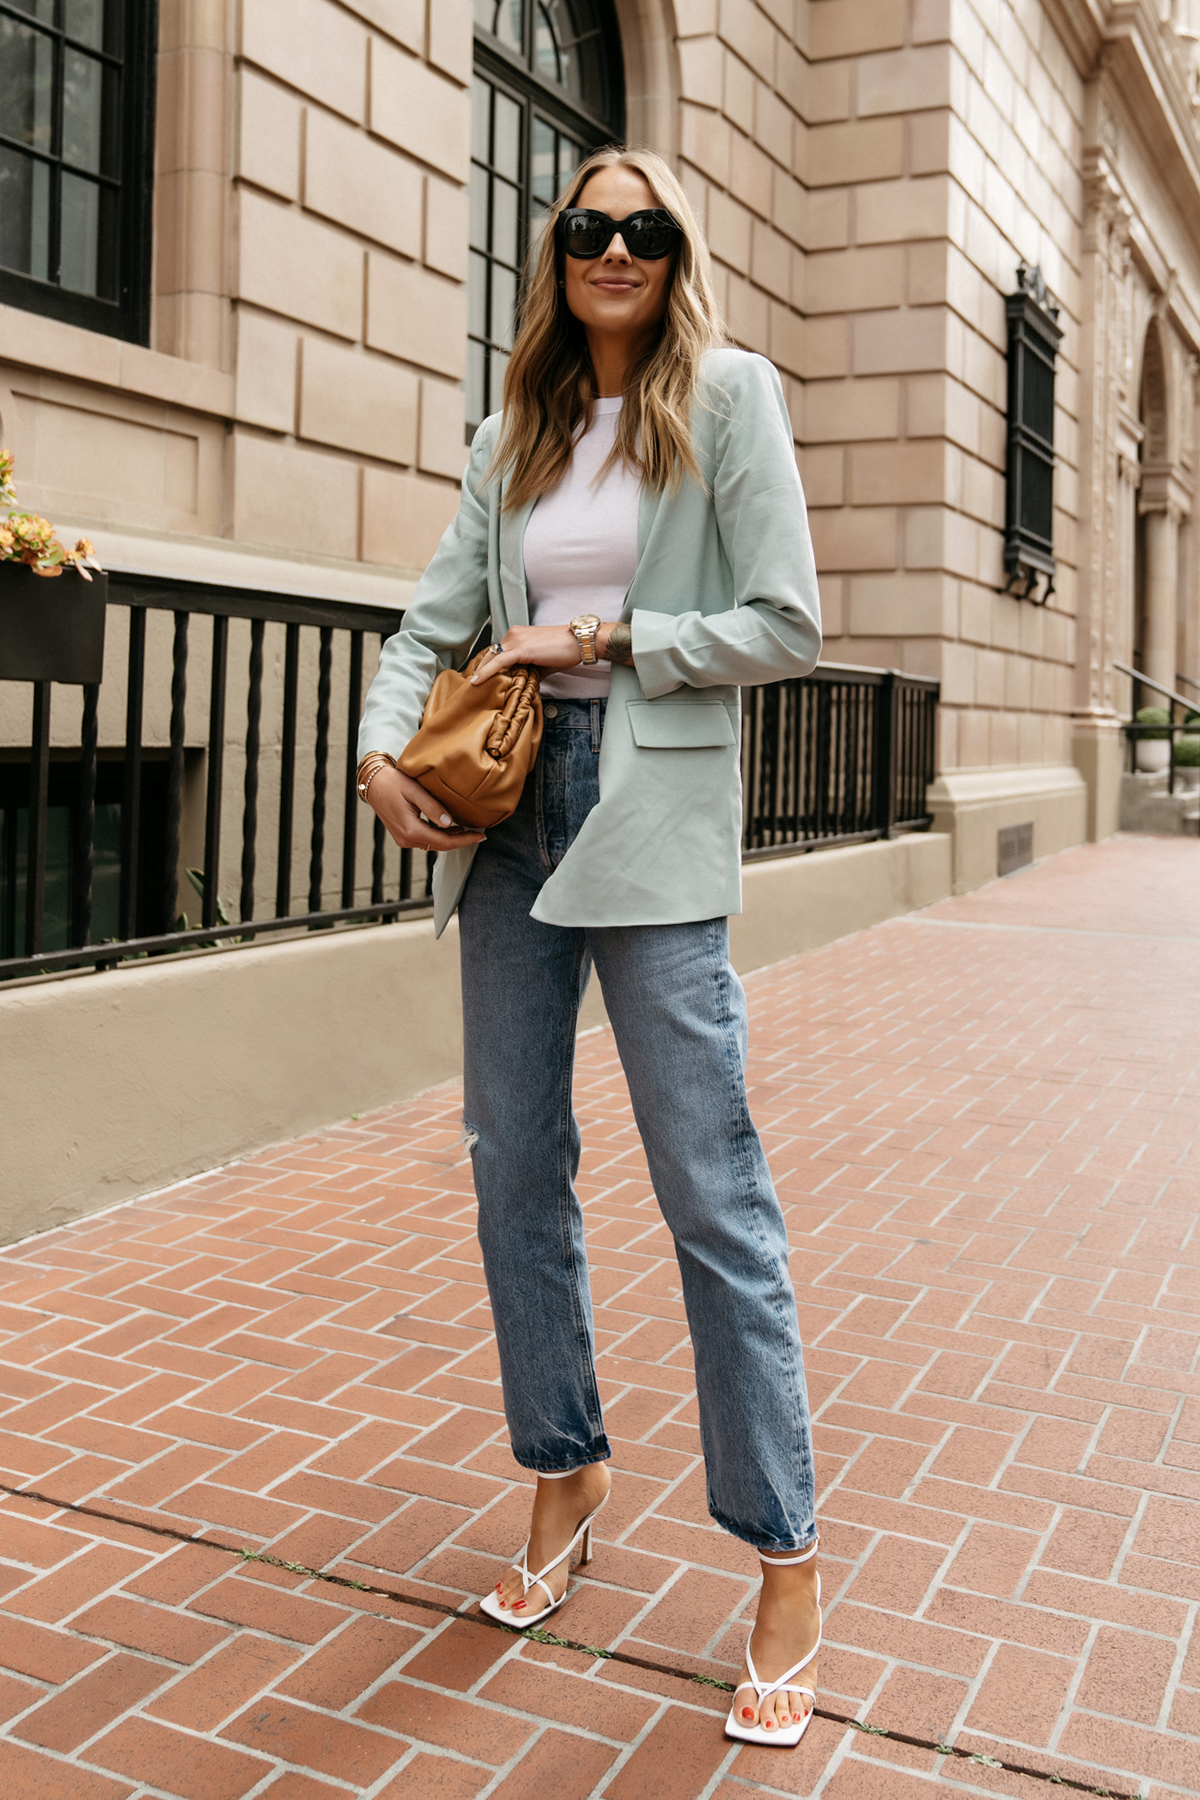 Fashion-Jackson-Wearing-Teal-Blazer-White-Tank-AGOLDE-Jeans-Bottega-Veneta-Stretch-Square-Toe-Sandals-White-Spring-Summer-Color-Trends-Womens-Outfit-Street-Style